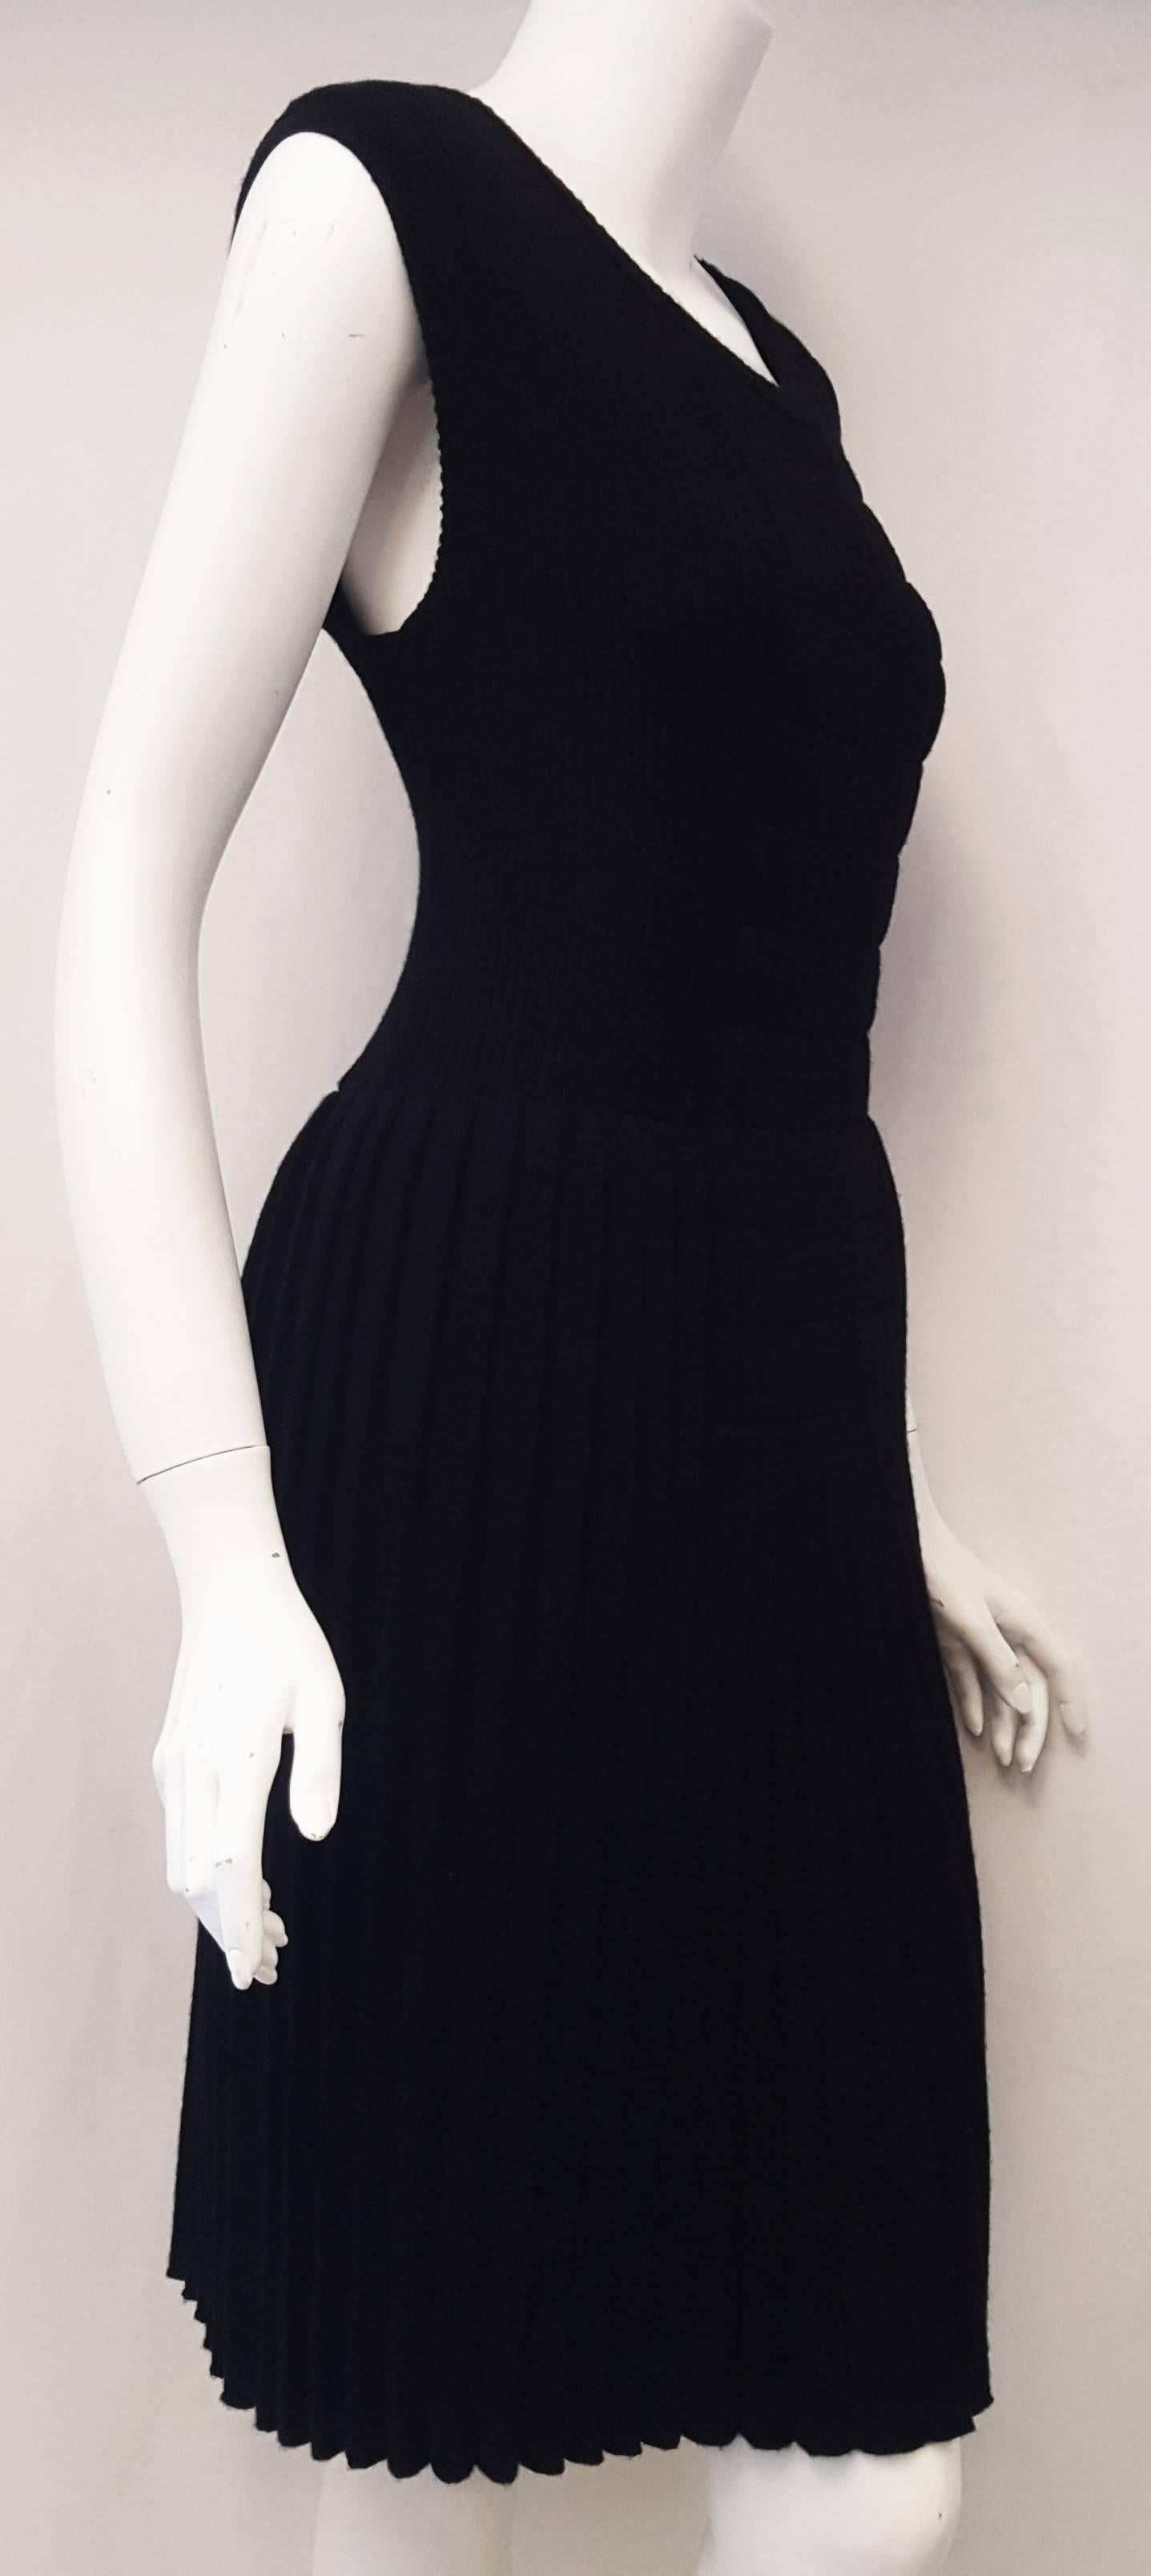 Women's Chanel Black Wool Dress with Pleated Skirt, Fall 2007 Collection 